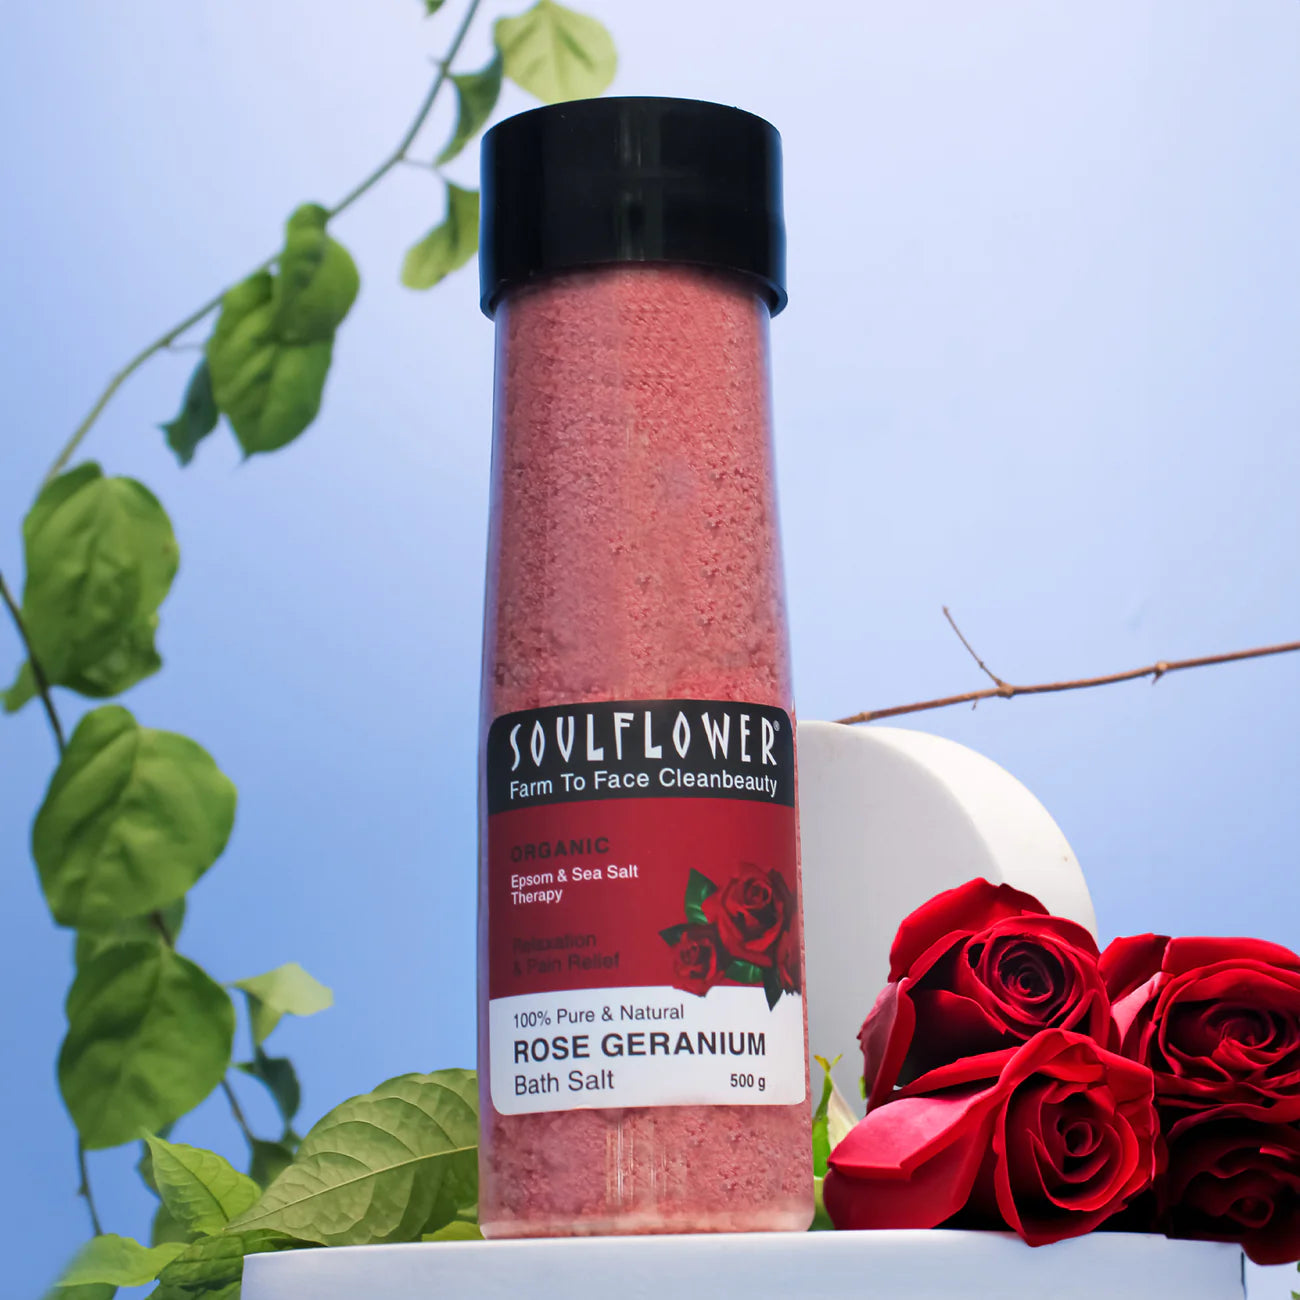 Luxurious Cleanser to detoxify skin - Try out Rose Geranium Bath Salt!